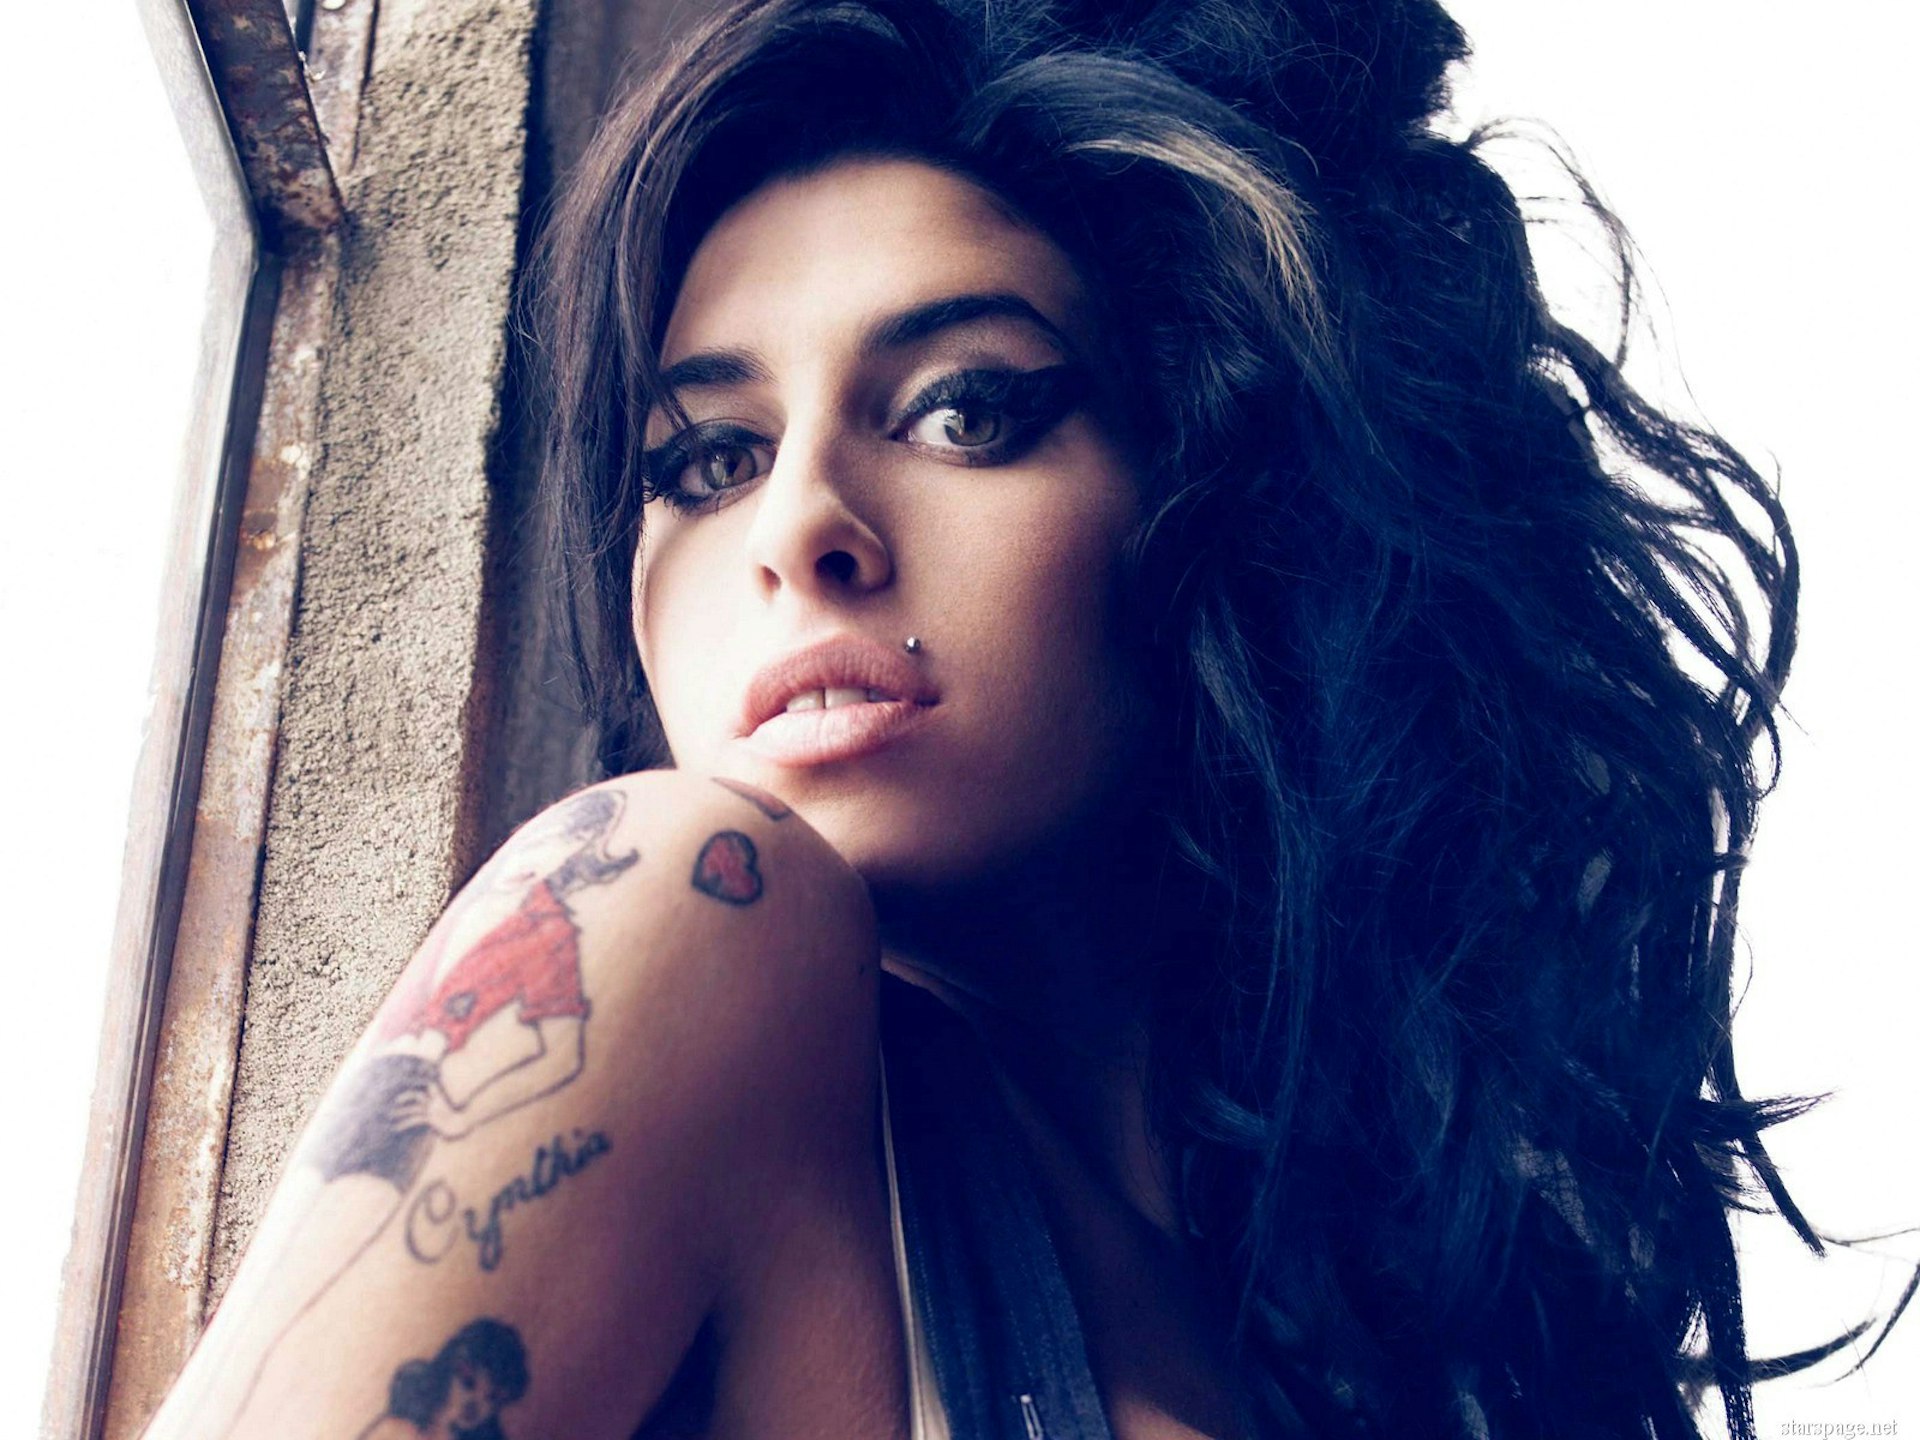 Amy Winehouse's best collaborations